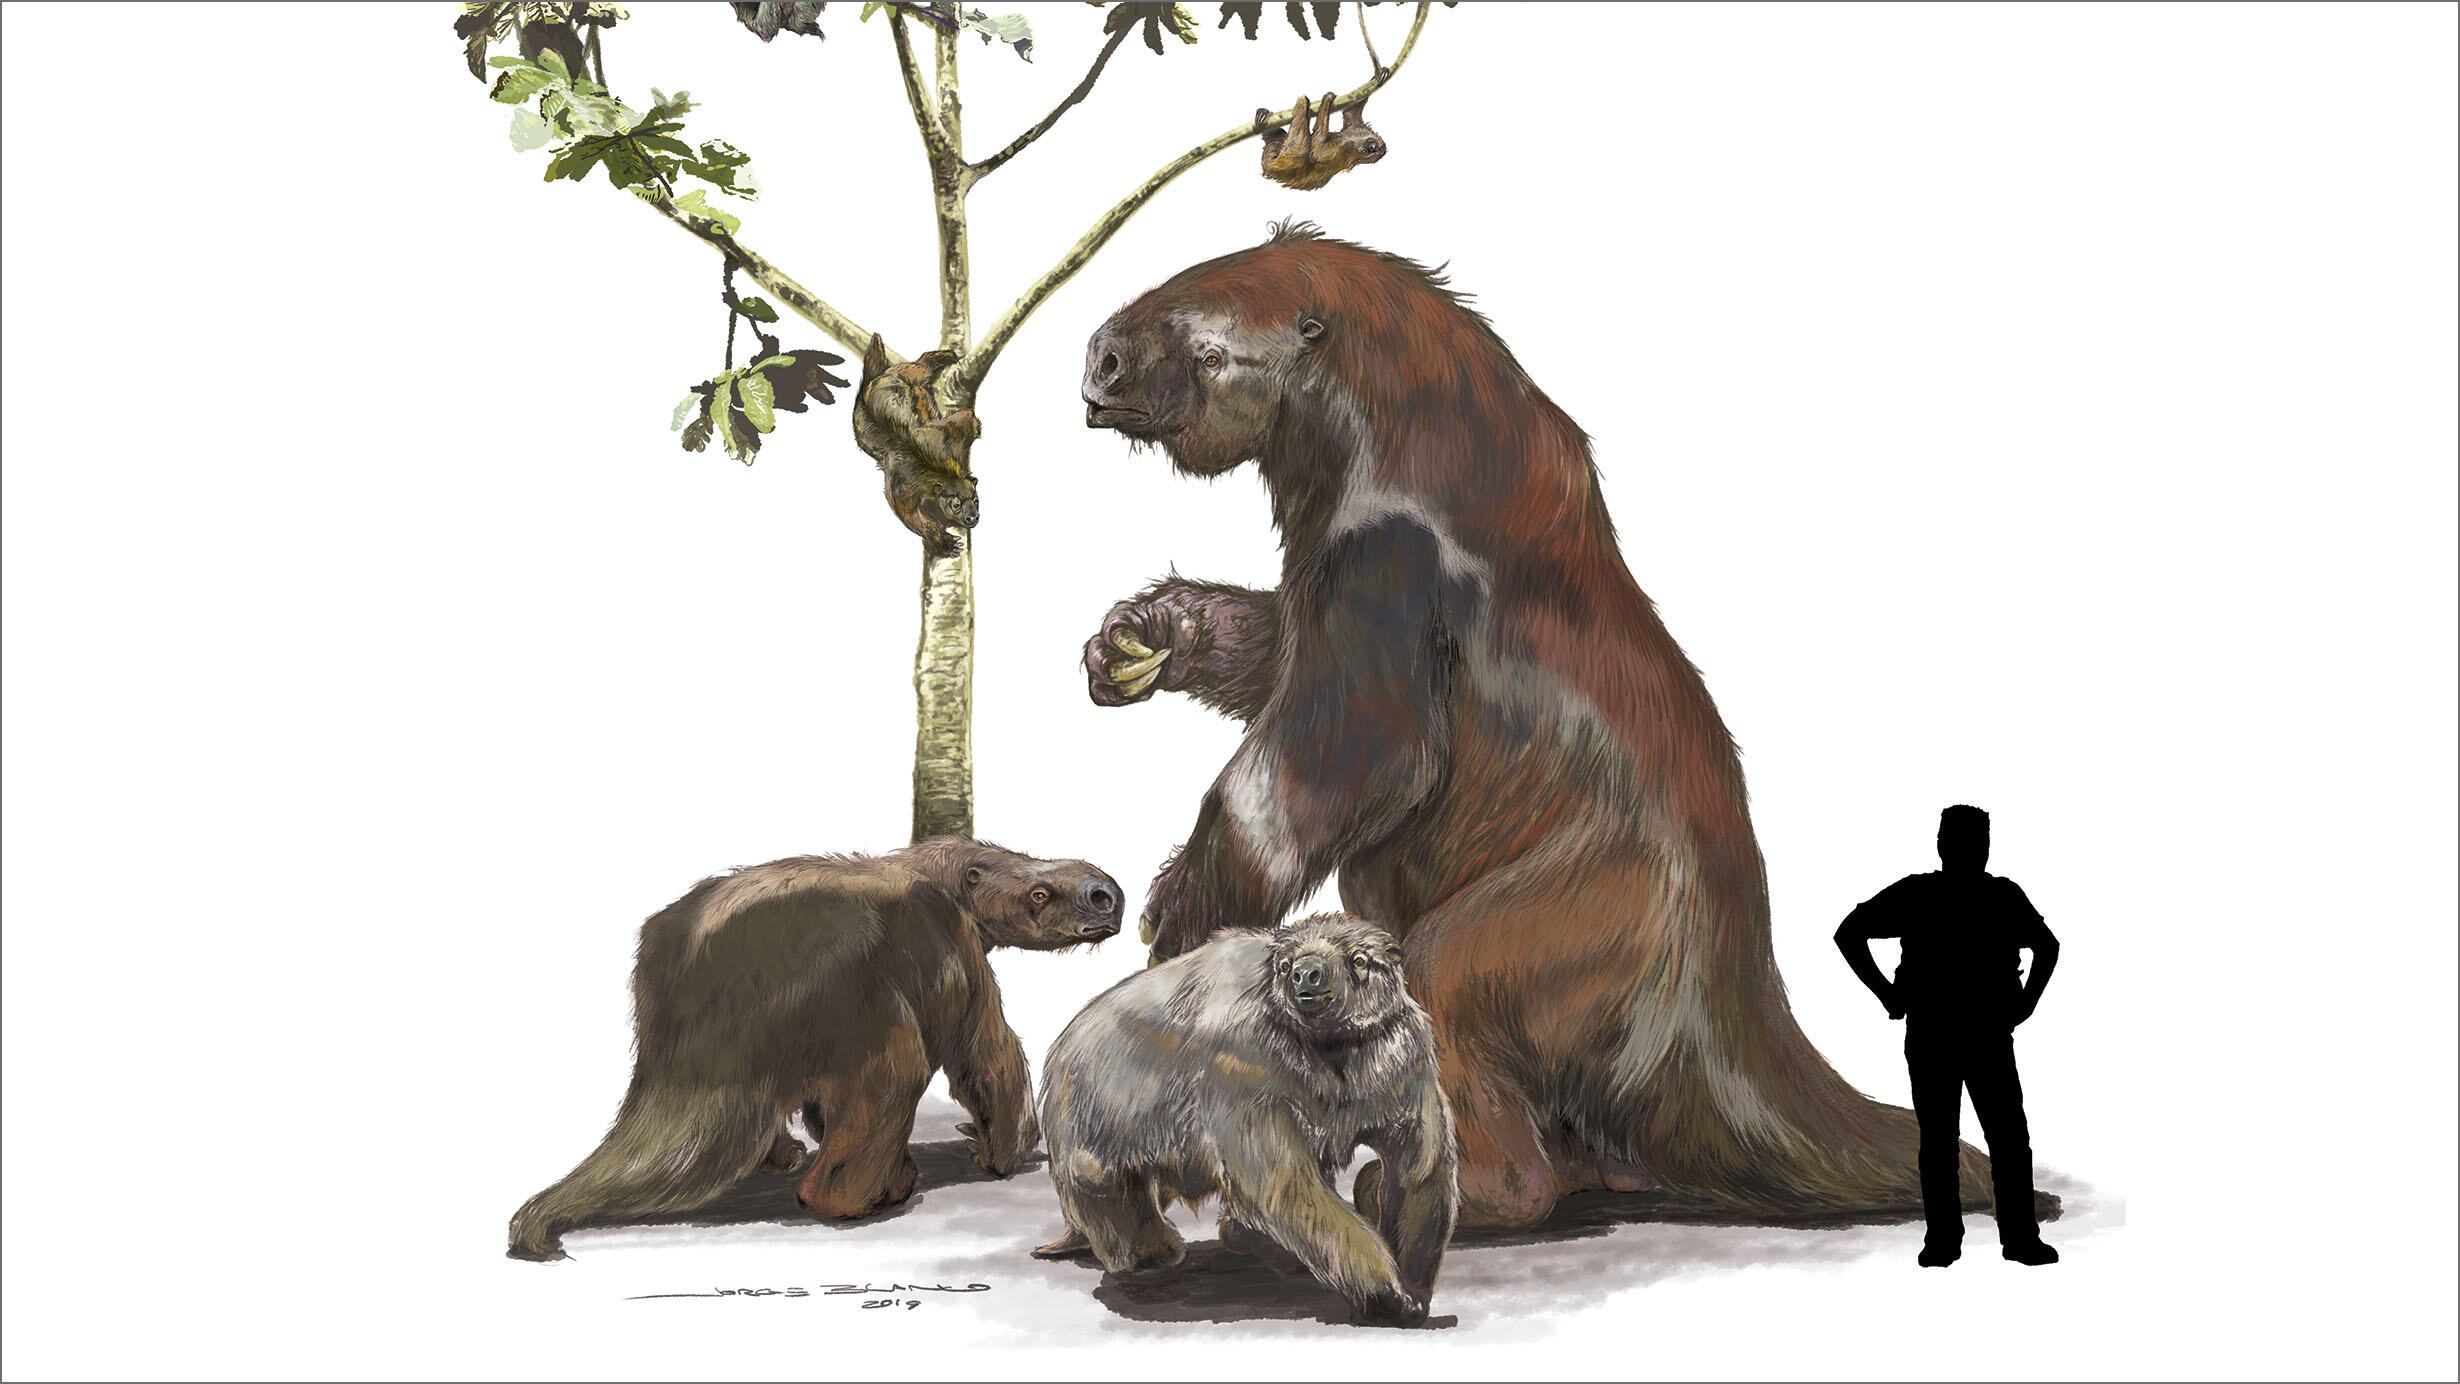 Illustration depicting extinct and extant sloth species, with human figure for scale. 